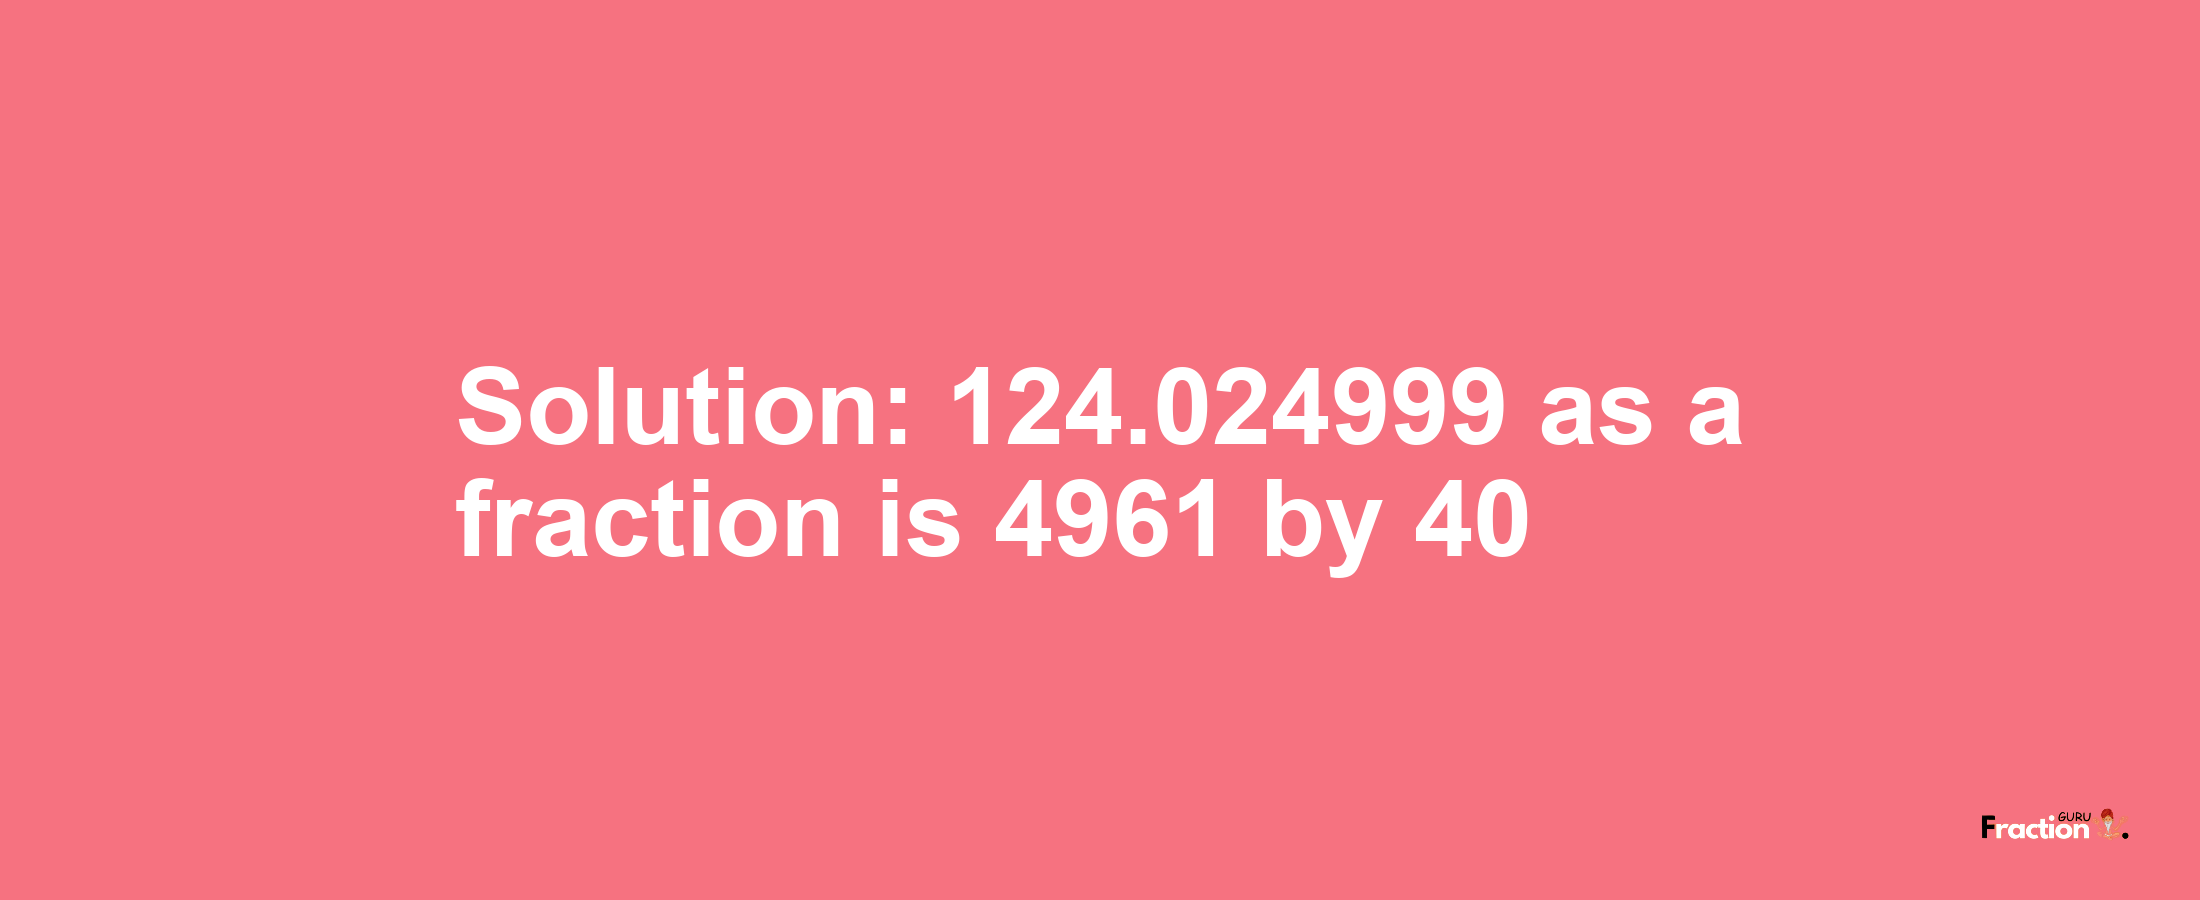 Solution:124.024999 as a fraction is 4961/40